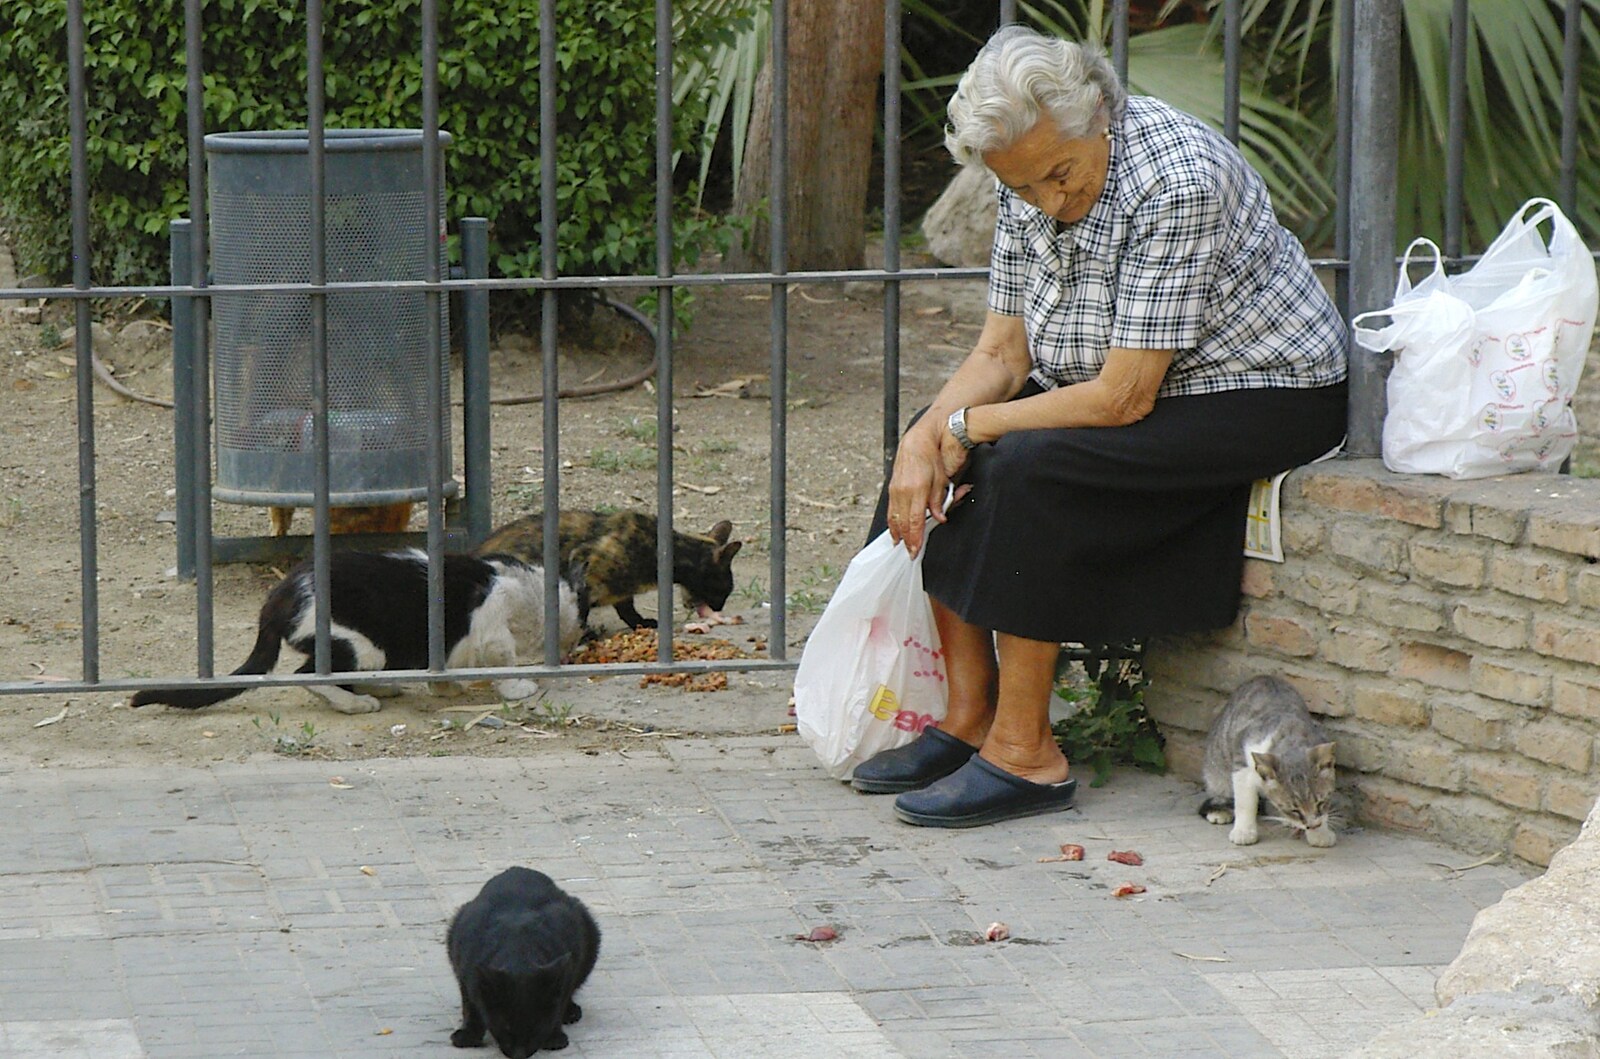 An woman feeds feral cats scraps of mystery meat from Working at Telefónica, Malaga, Spain - 6th June 2006